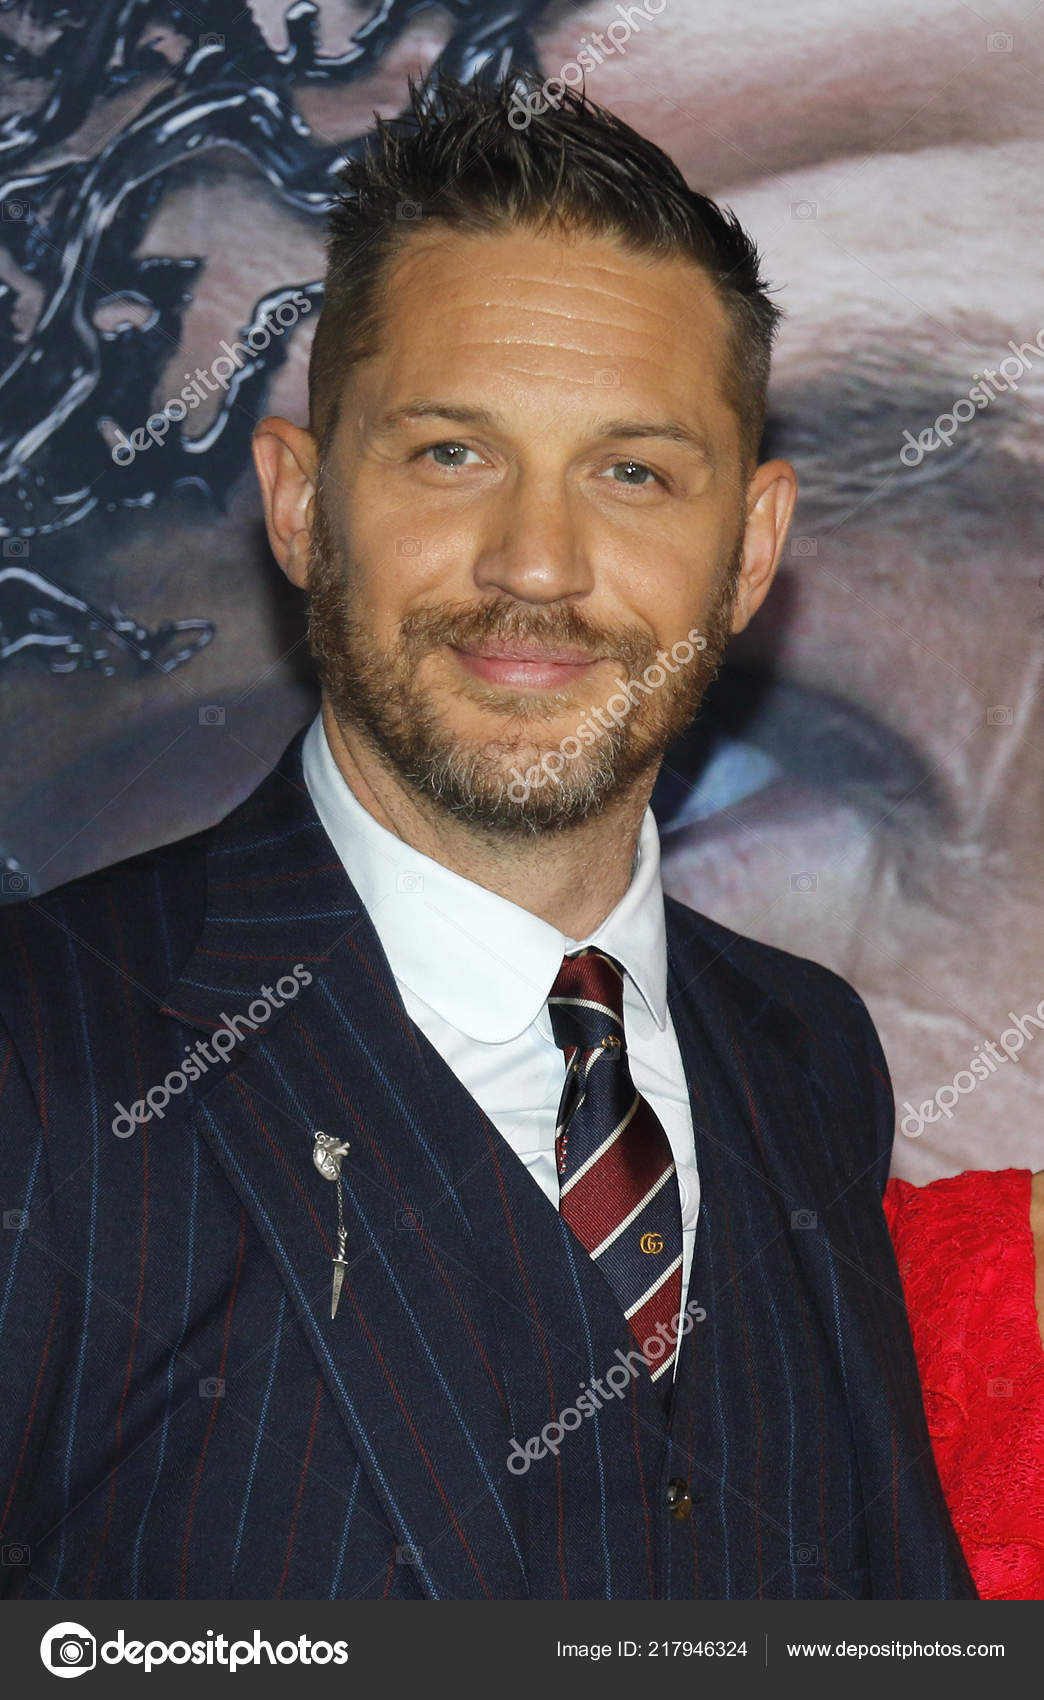 Tom Hardy reveals Venom character in upcoming Hollywood blockbuster is  based on UFC legend Conor McGregor | The Irish Sun